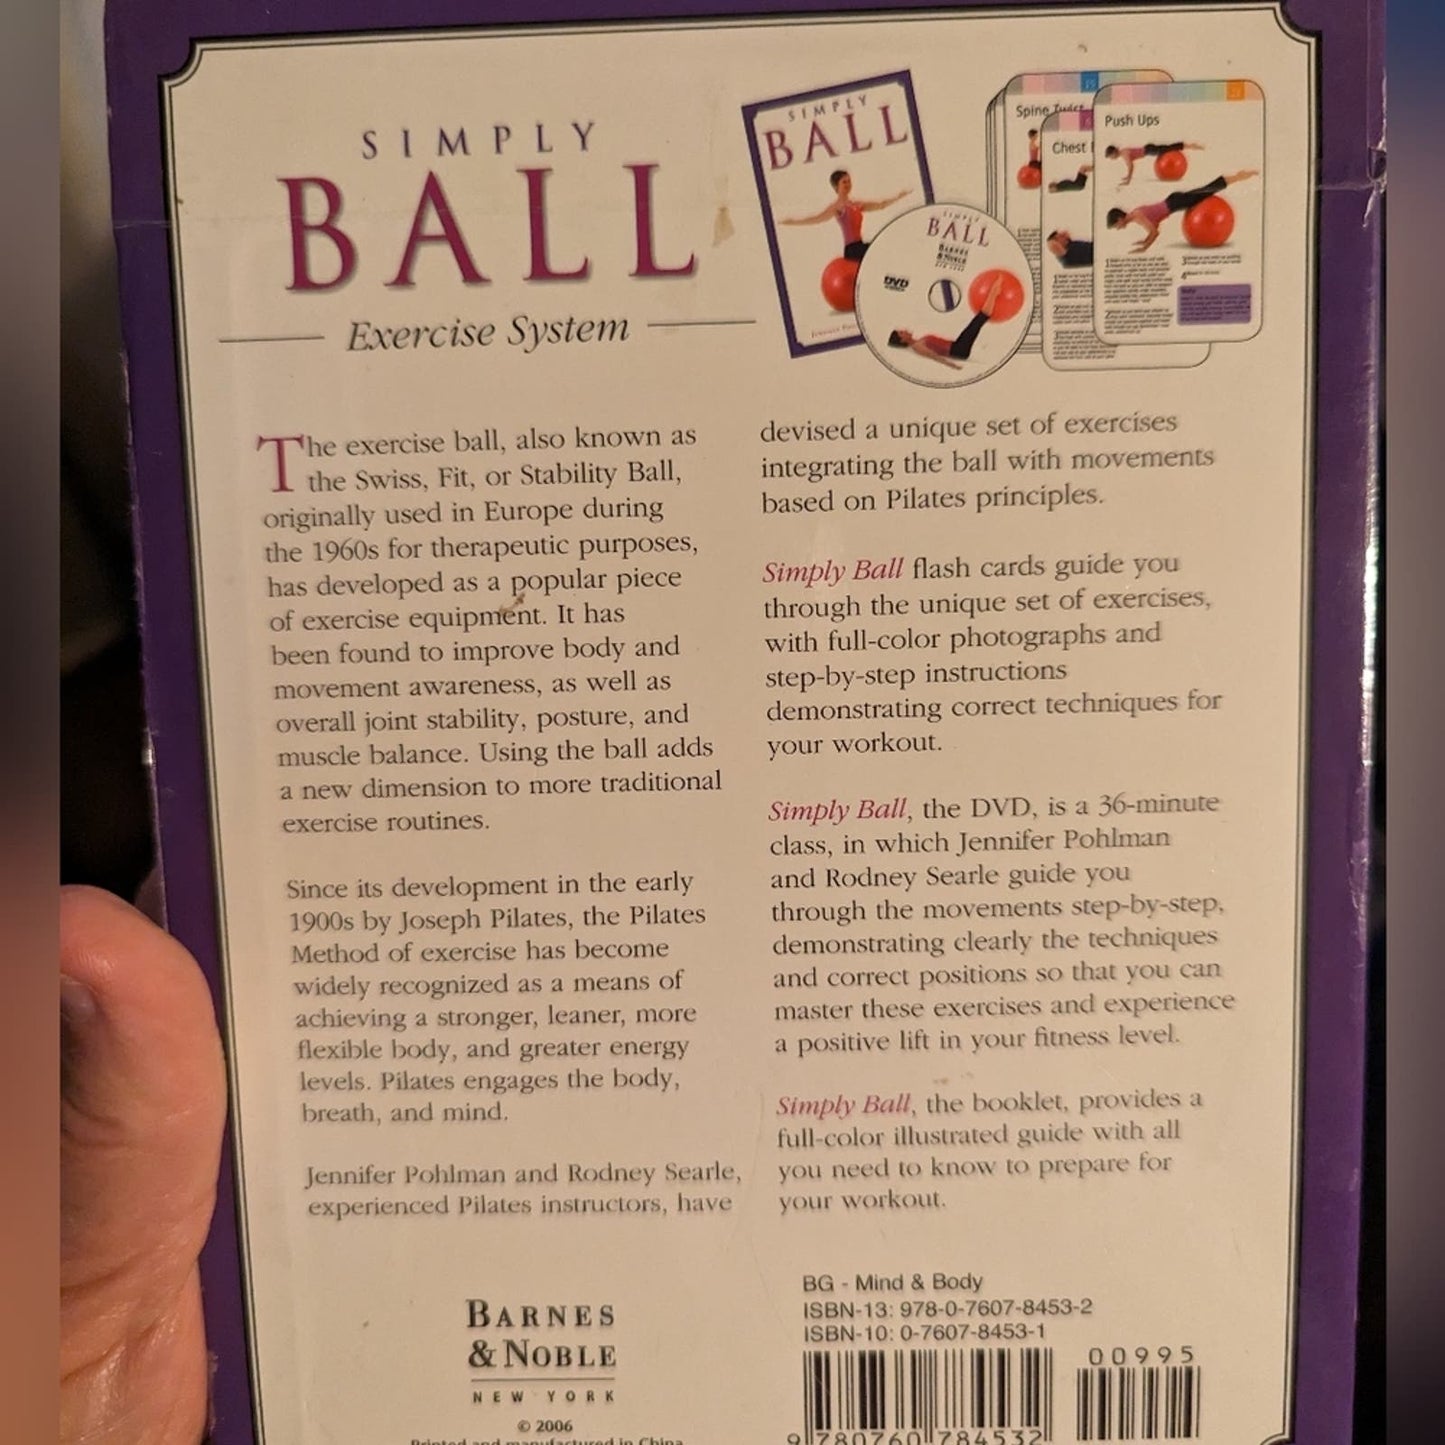 Simply Ball Exercise System / Flash Cards, DVD, and Book